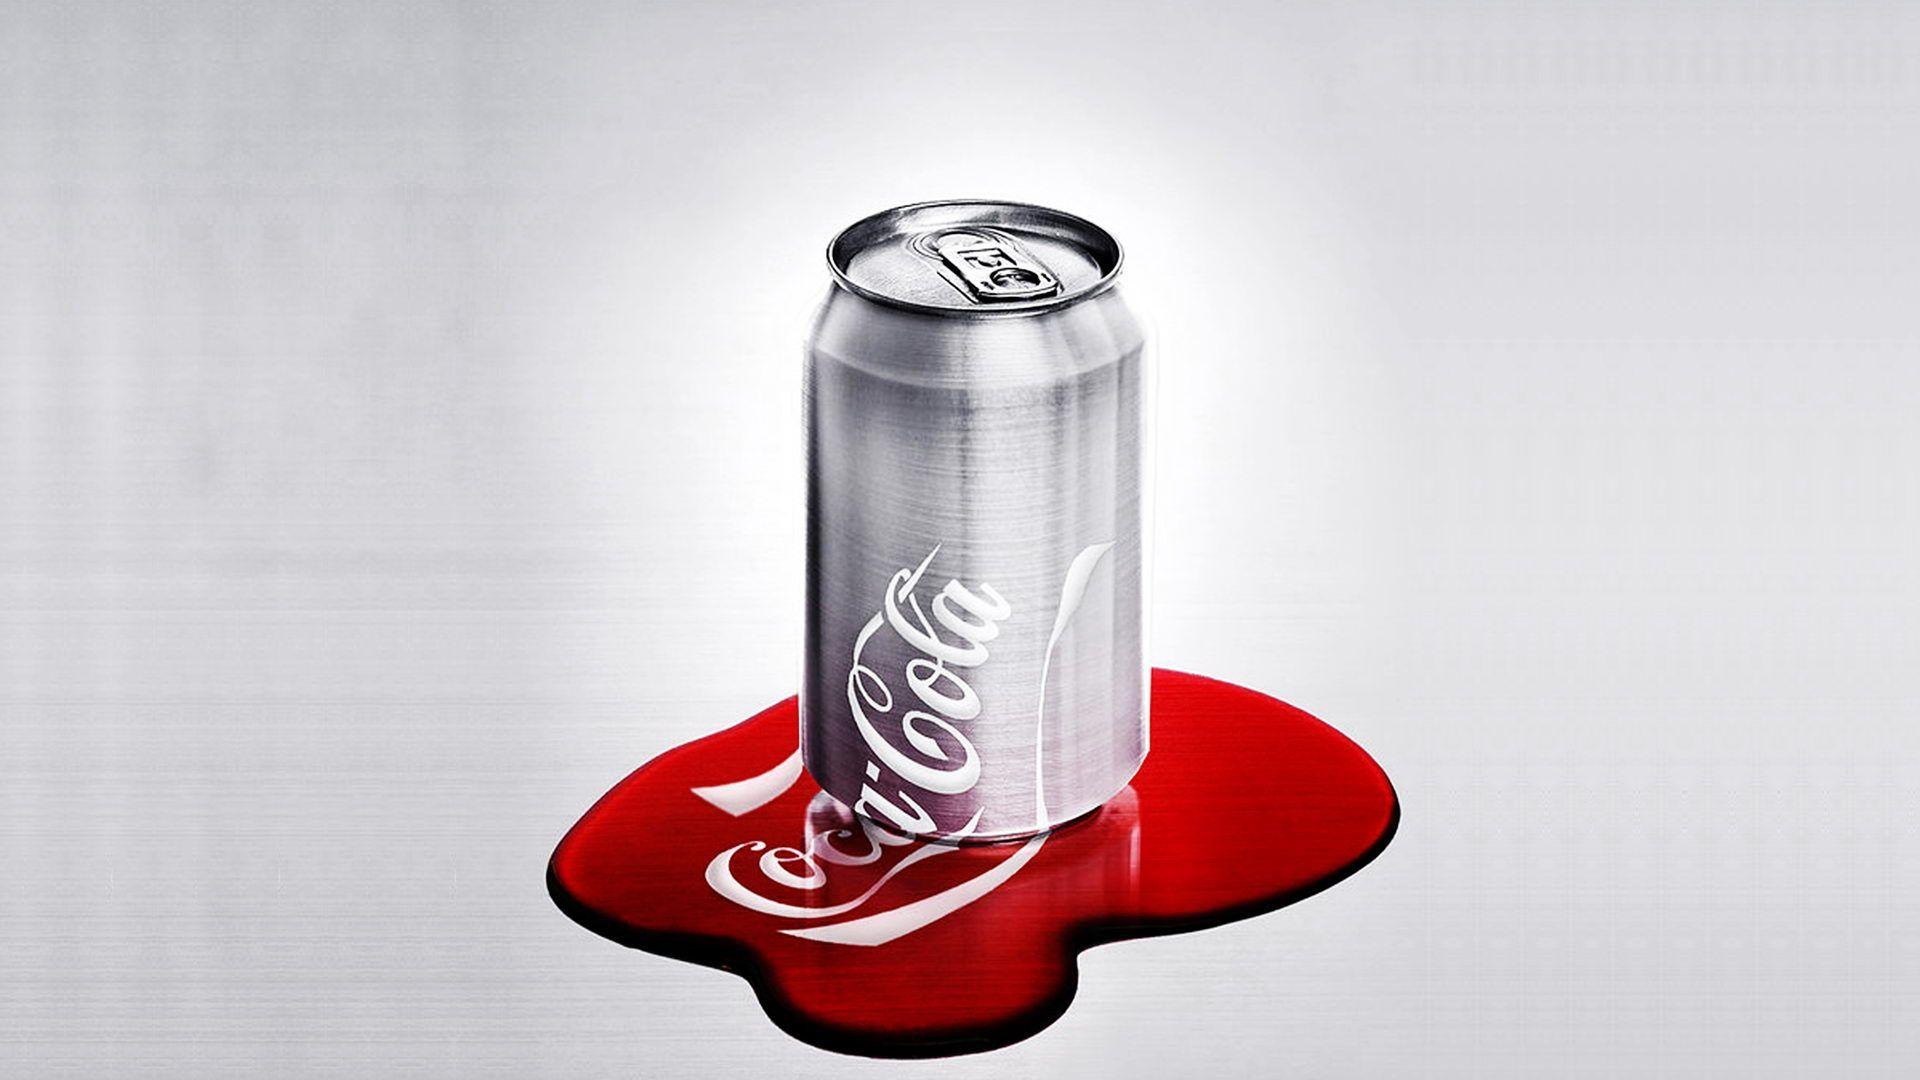 Download Coca Cola Wallpapers 2739 High Resolution